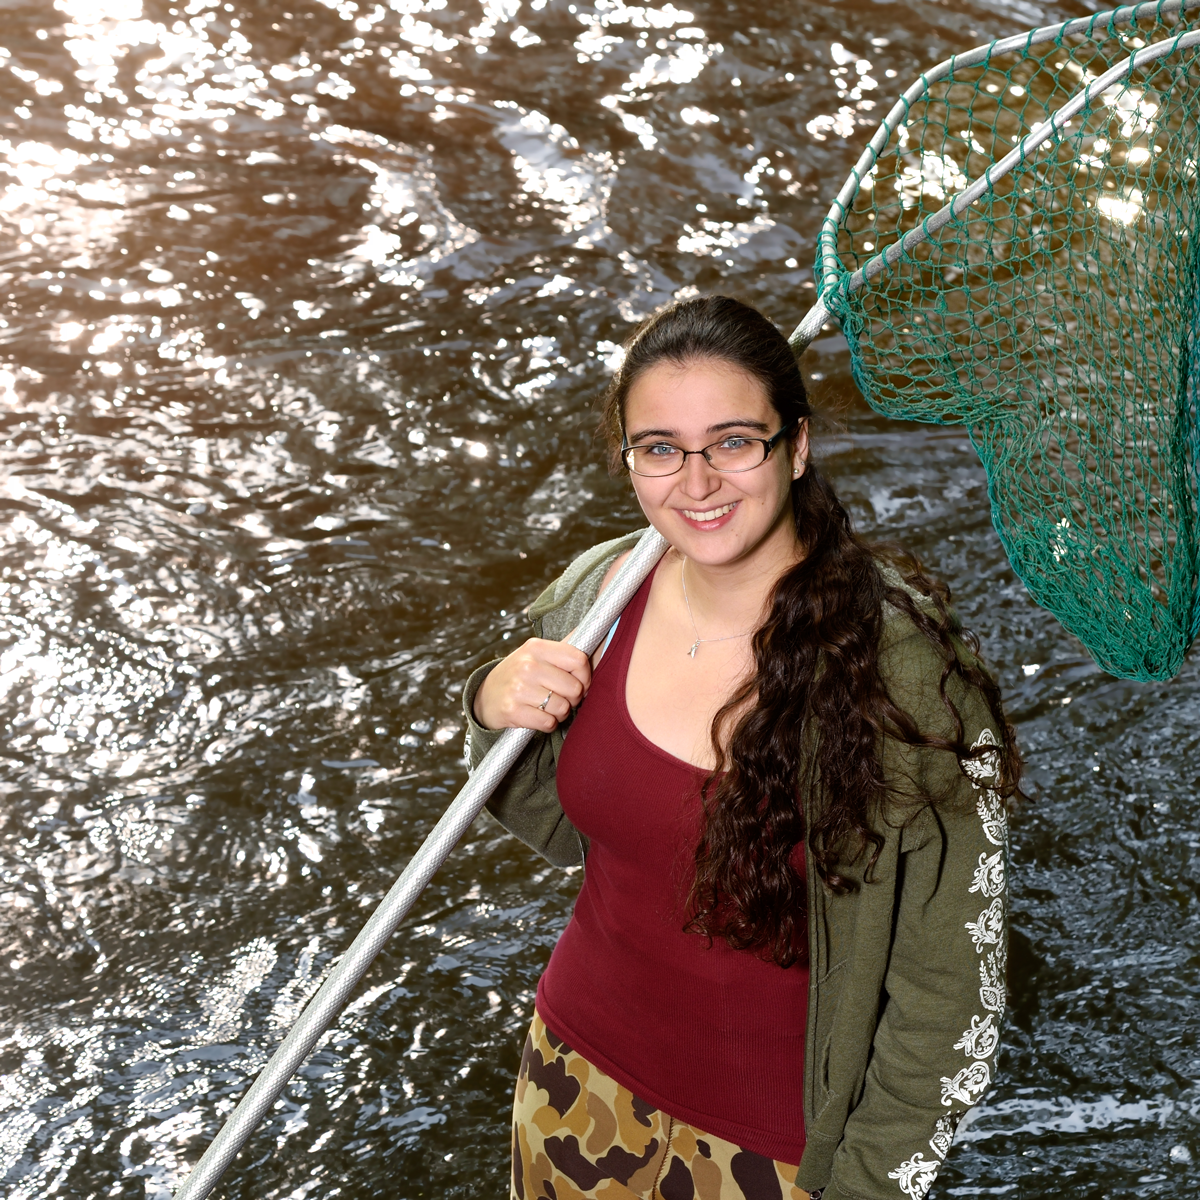 Clara Lepard standing in a body of water holding a net.